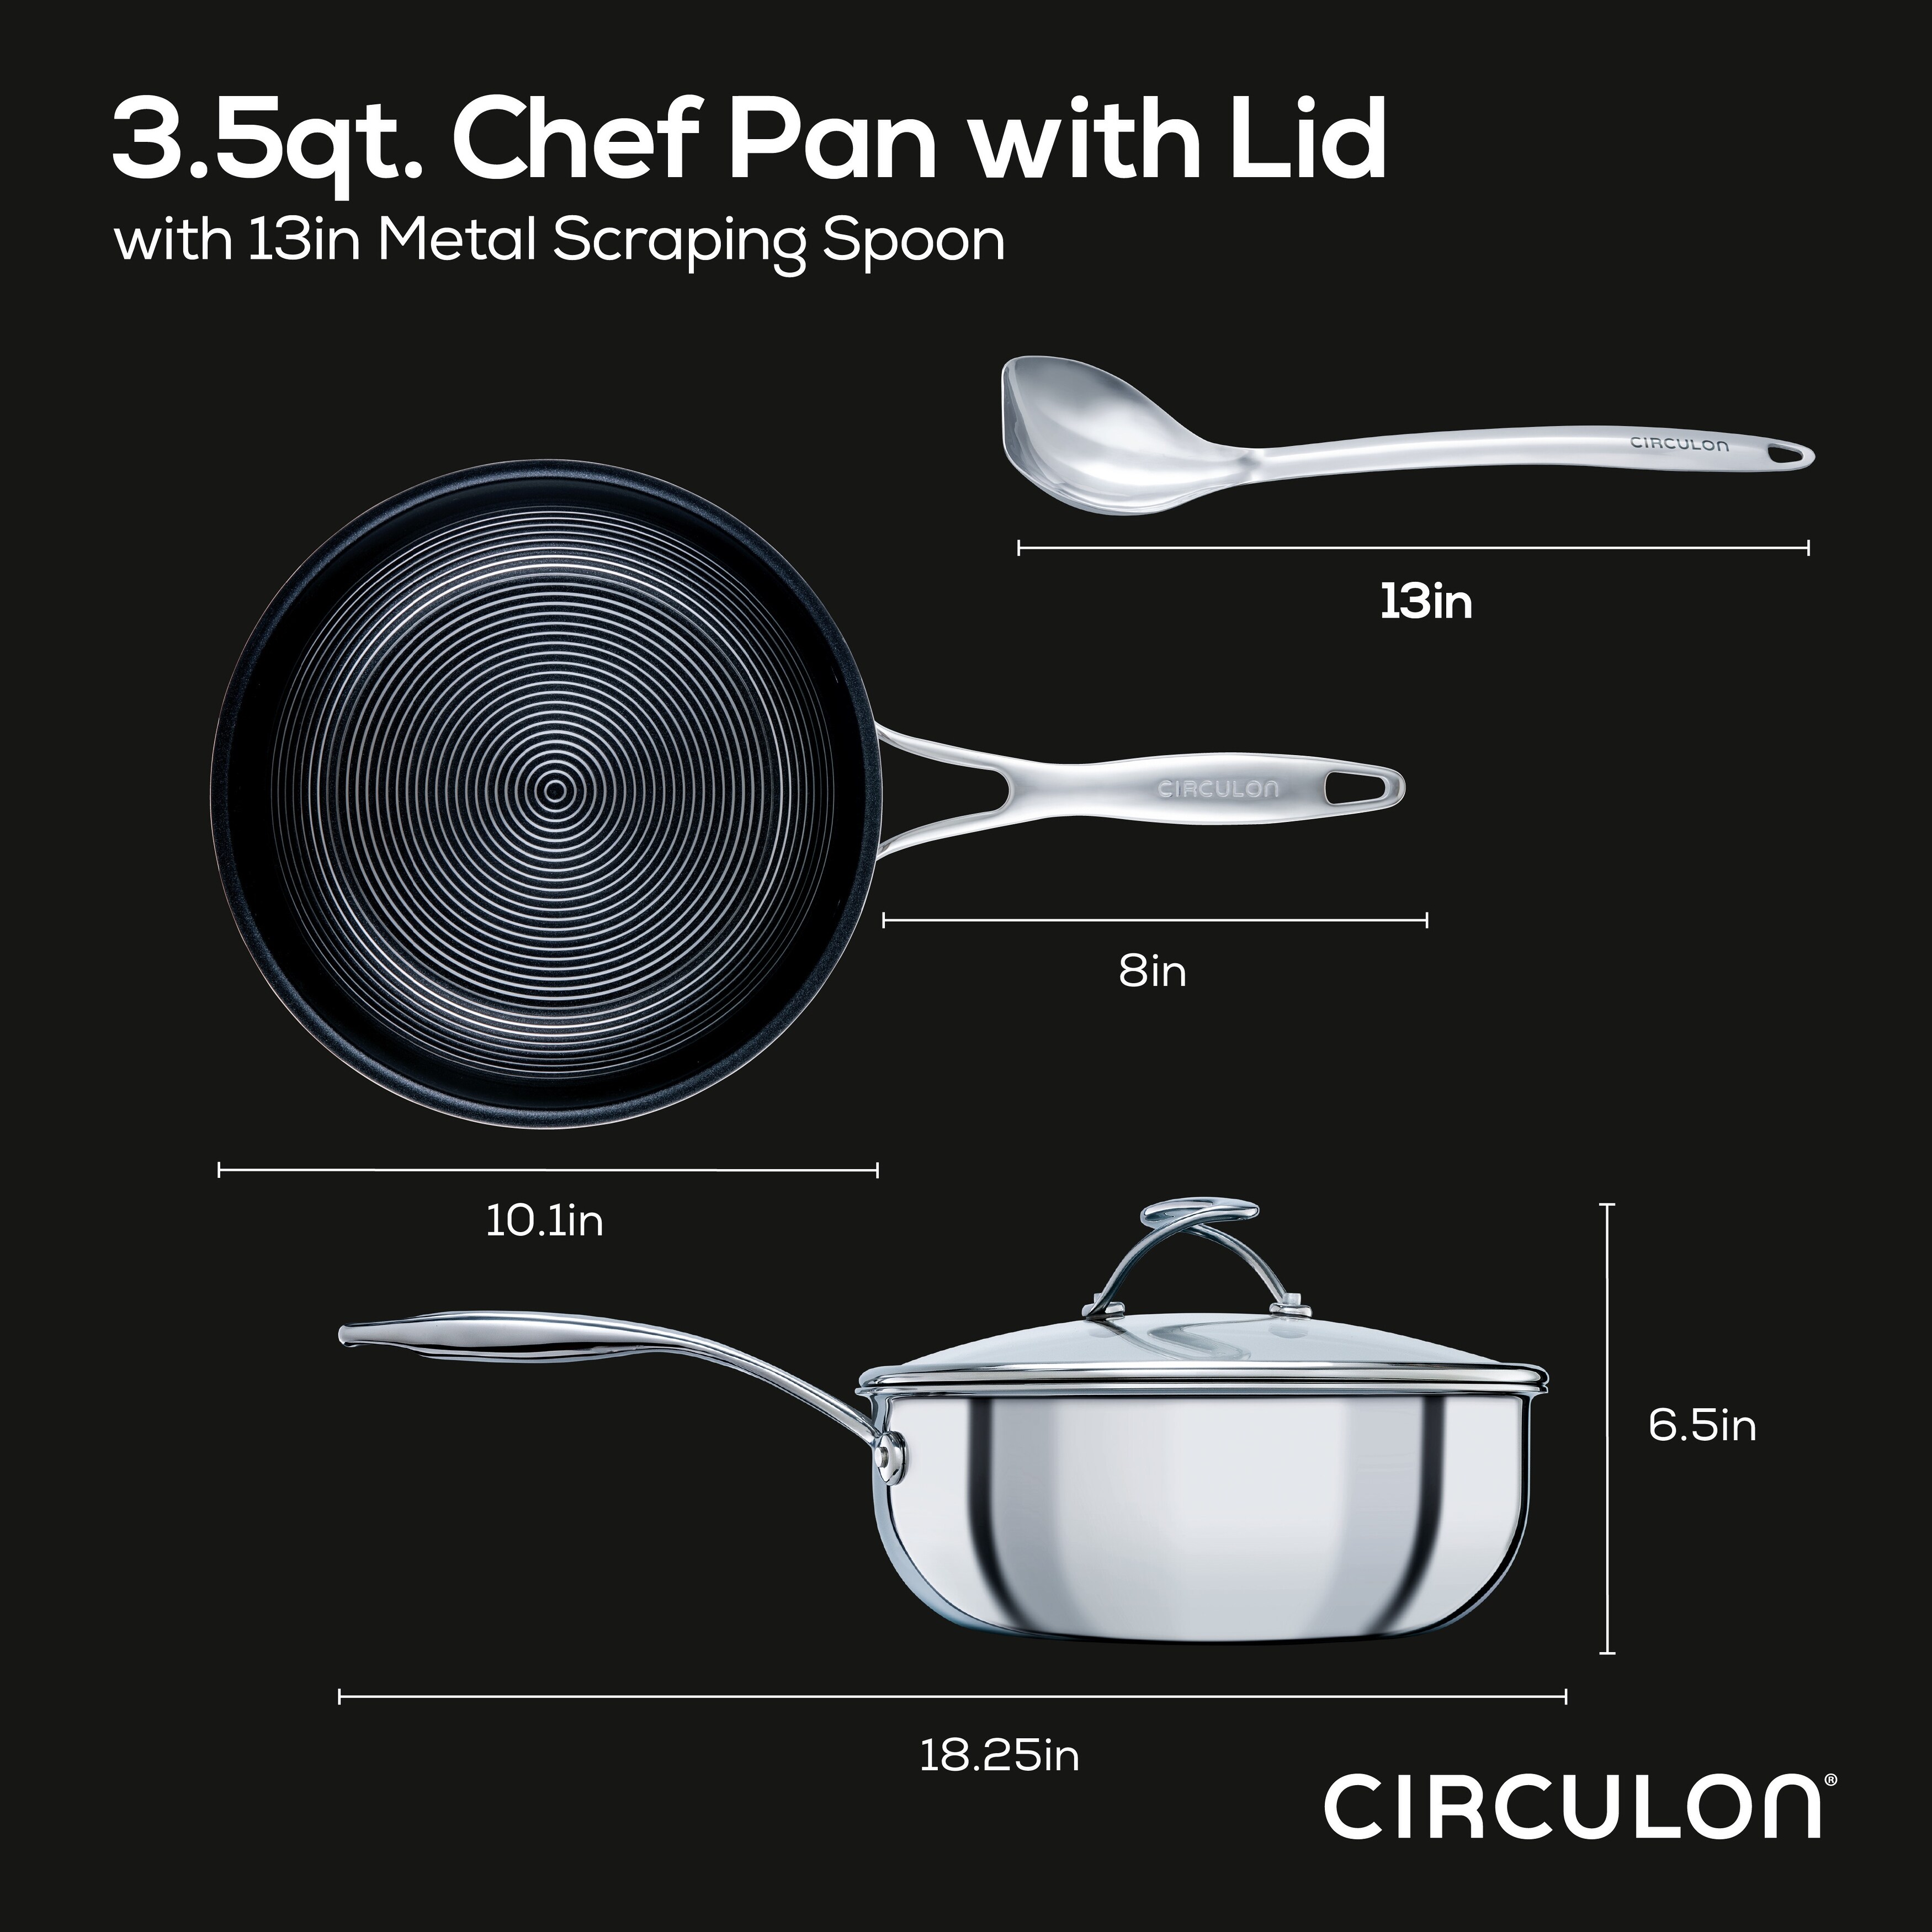 Circulon Clad Stainless Steel Cookware/Pots and Pans and Utensil Set with  Hybrid SteelShield and Nonstick Technology, 11 Piece - Silver